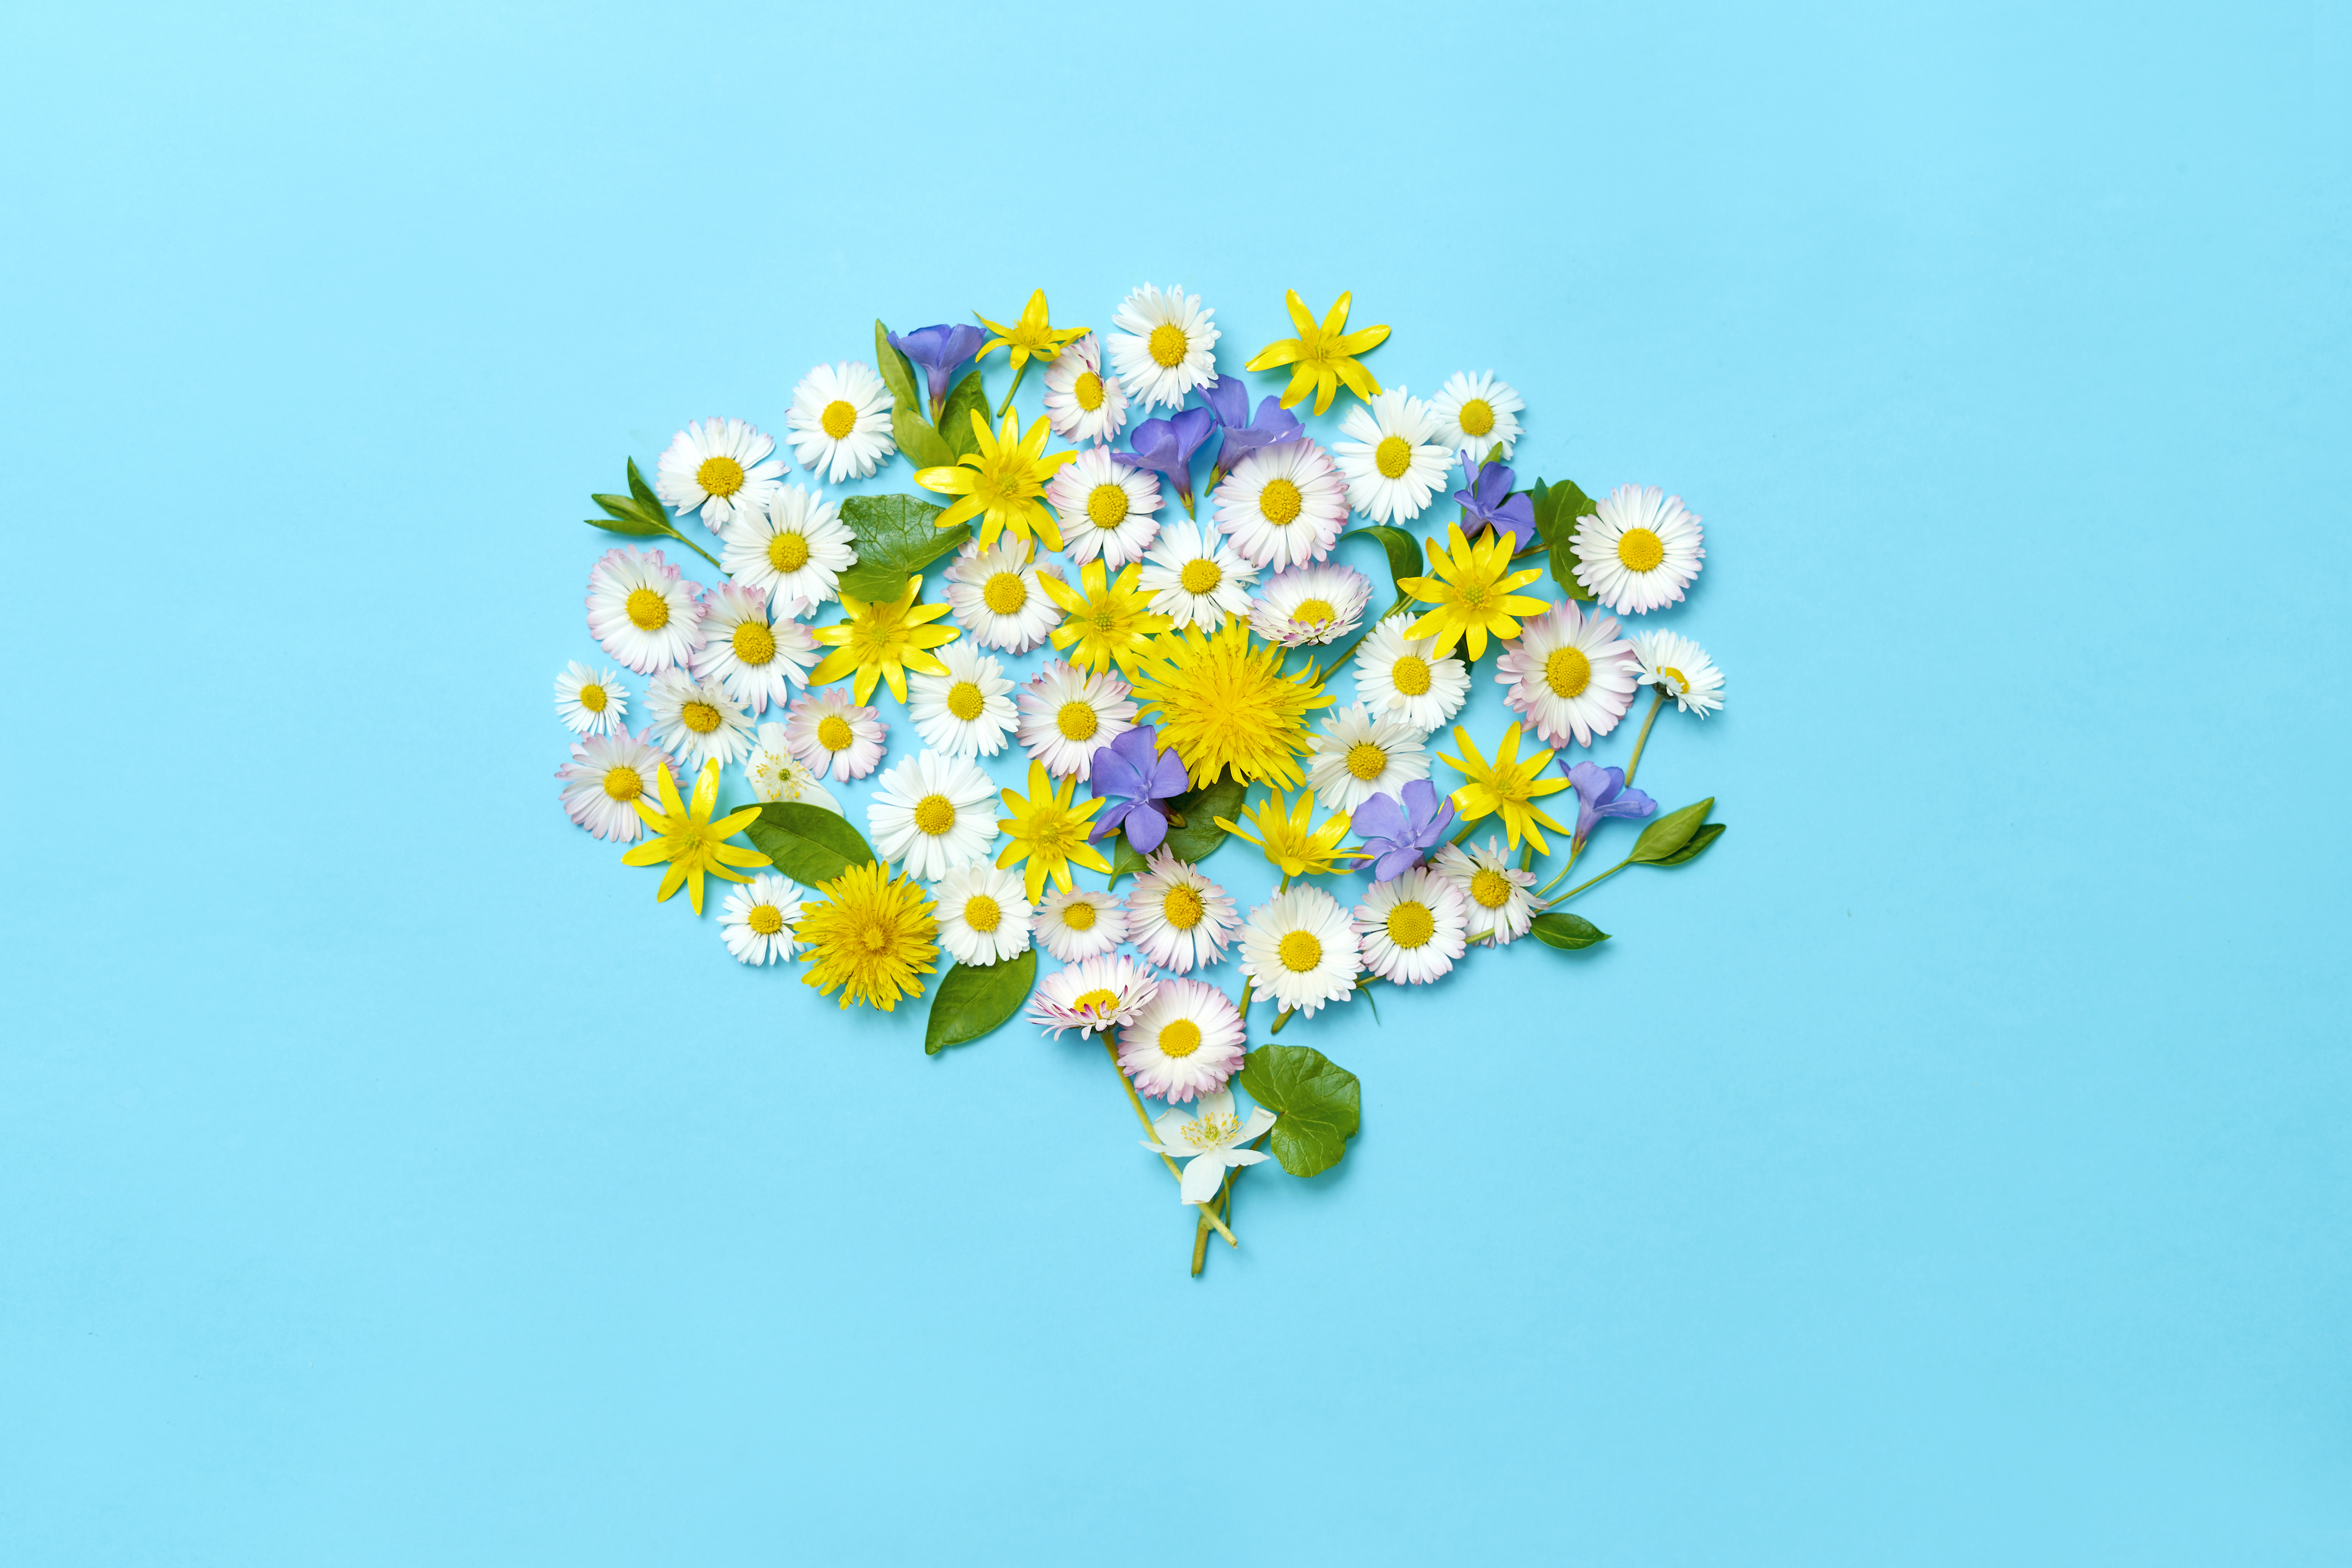 Image of flowers forming the shape of a brain to represent mental health and wellness.